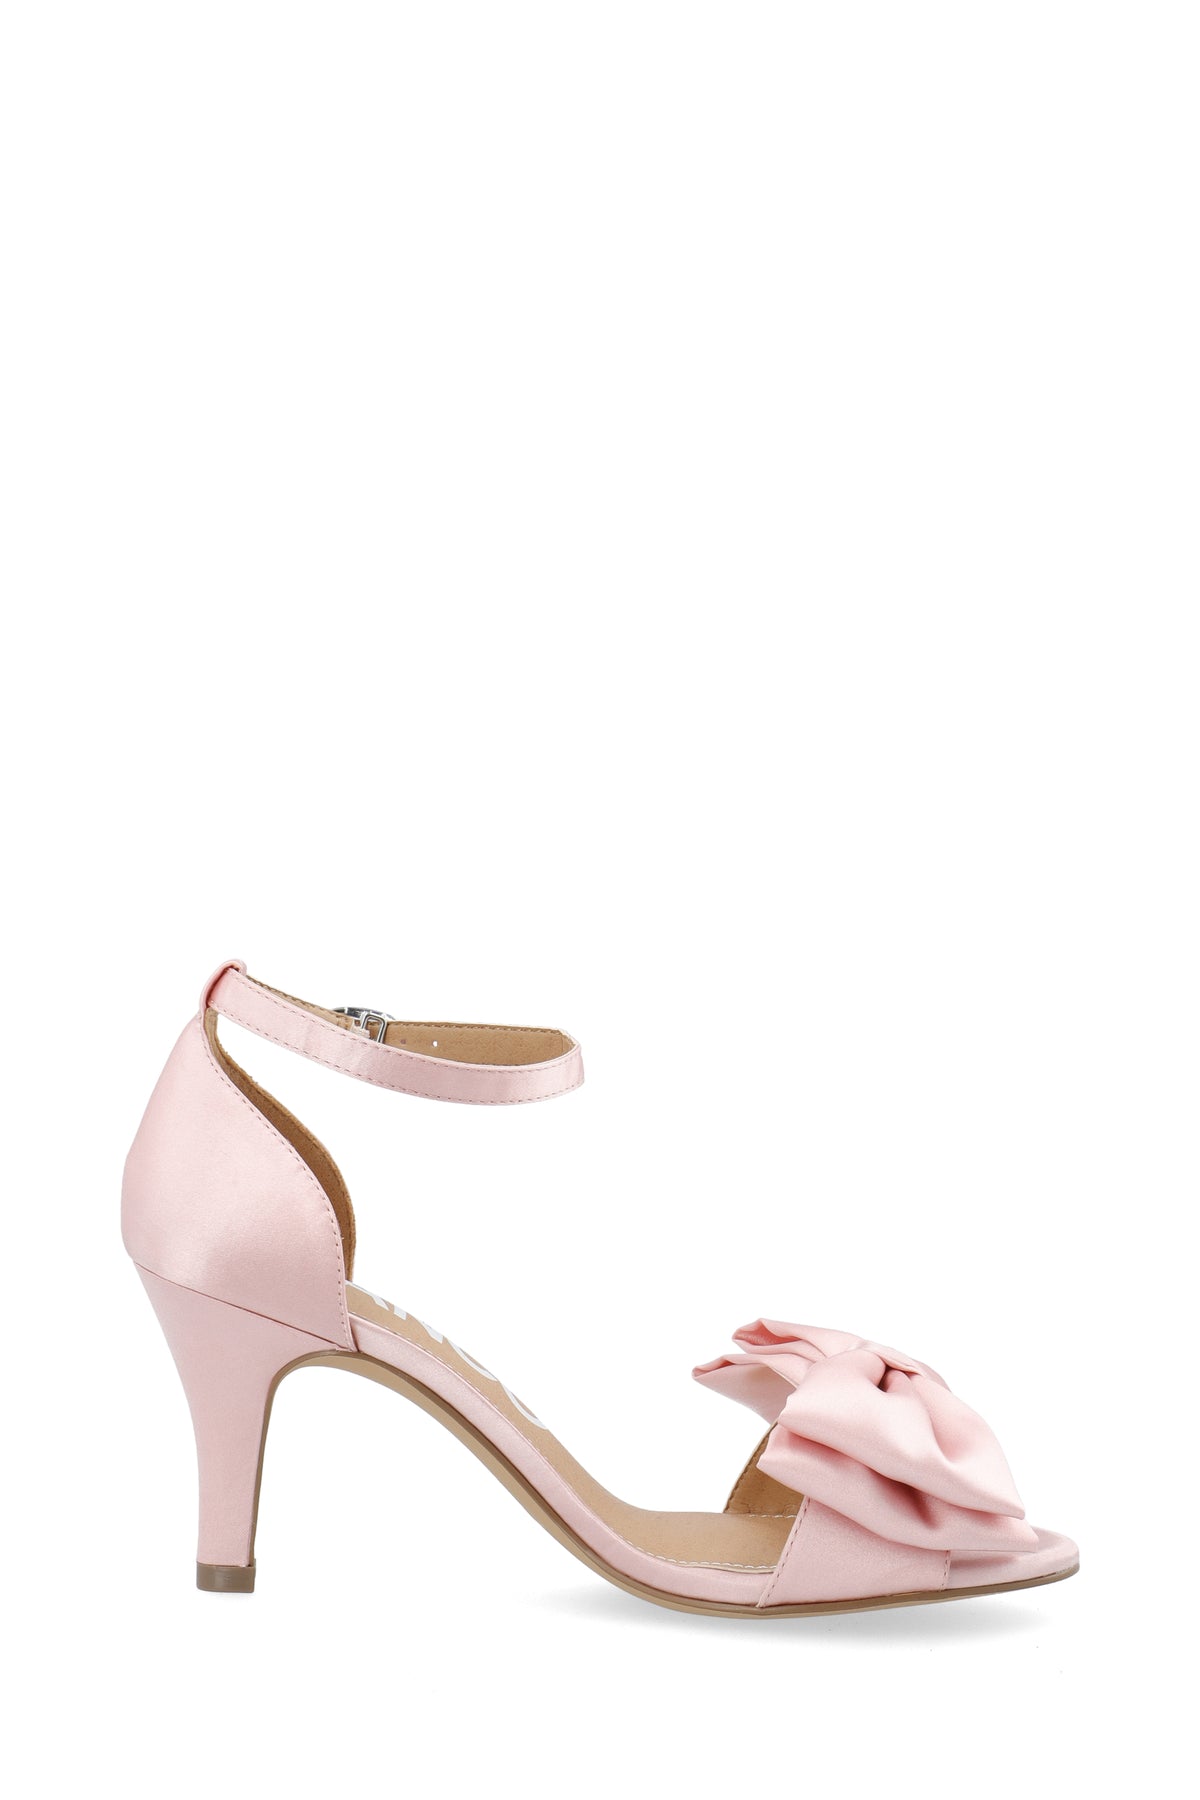 Biaadore Bow Sandal Satin - Dusty Pink